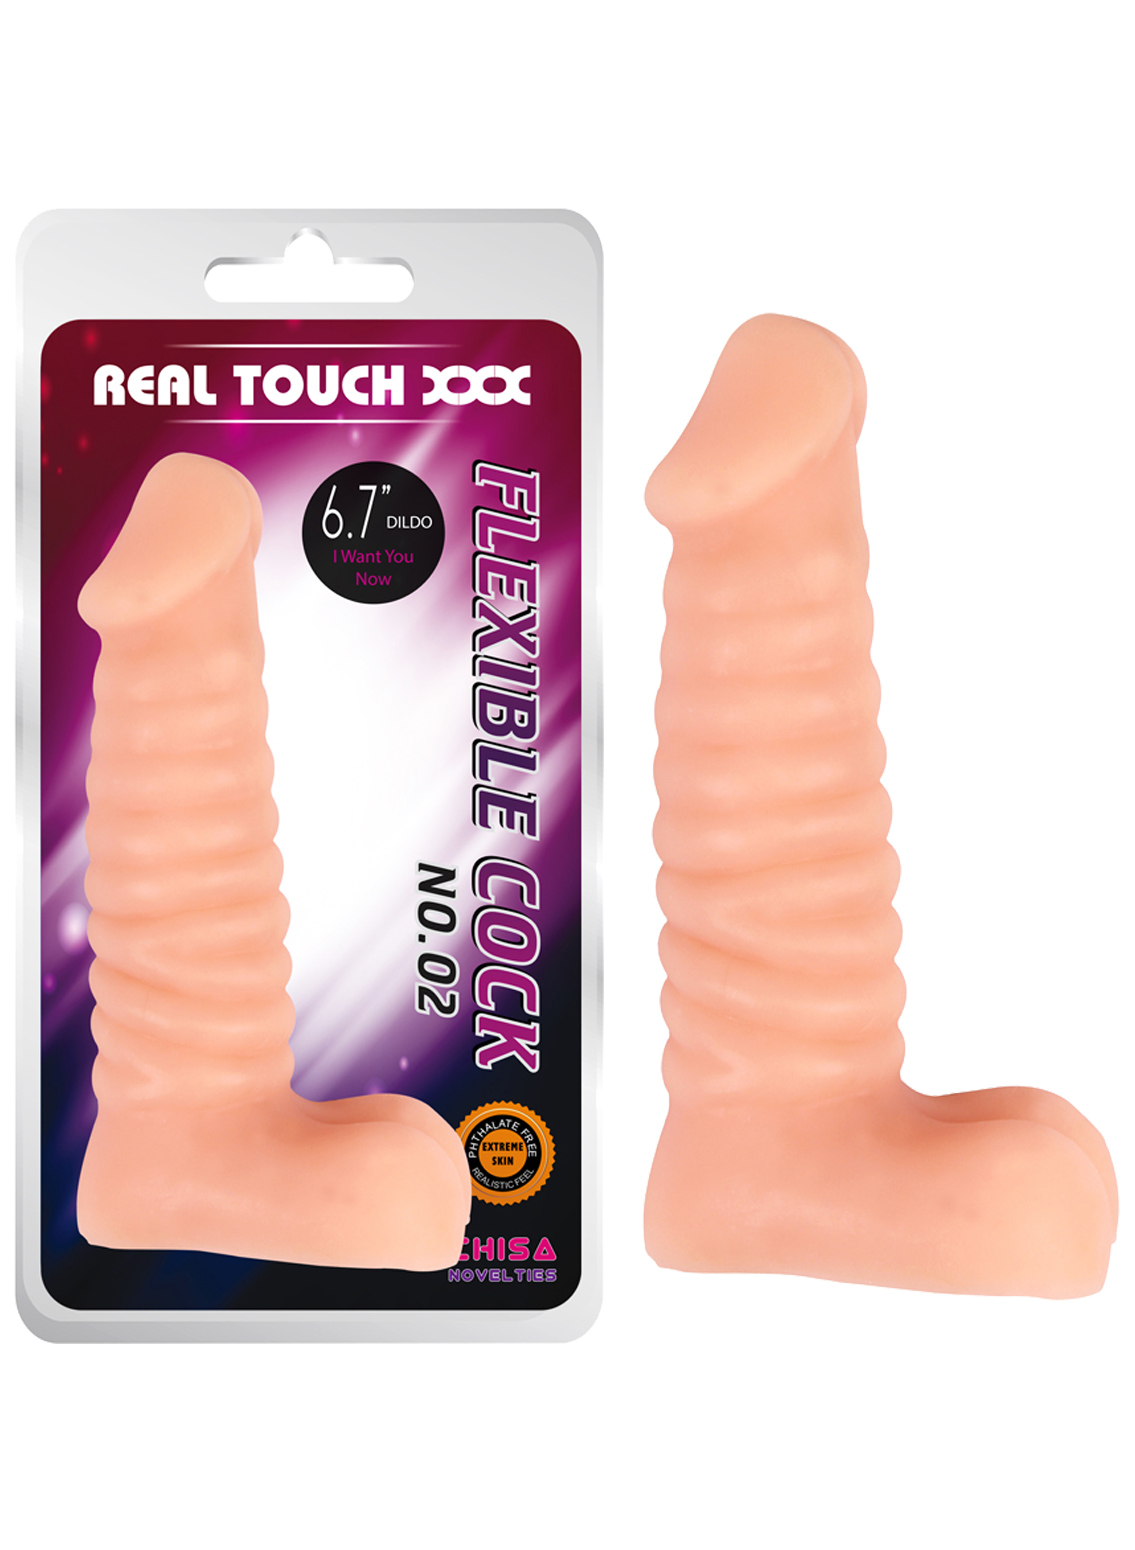 Chisa Novelties Real Touch XXX 6,7" Flexible Cock No.02